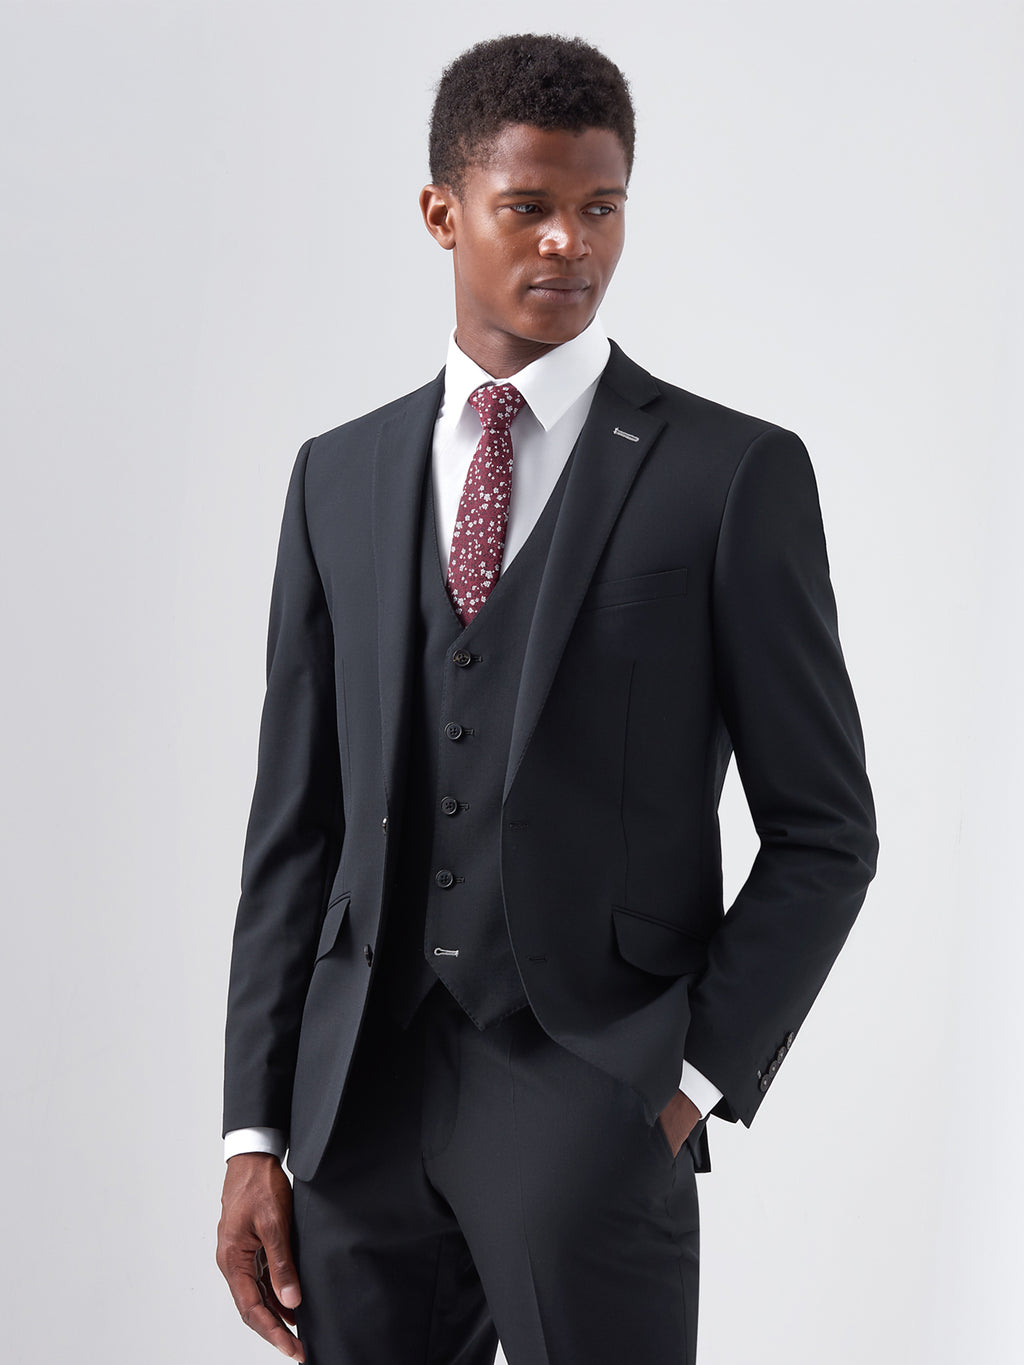 Tapered Black Suit